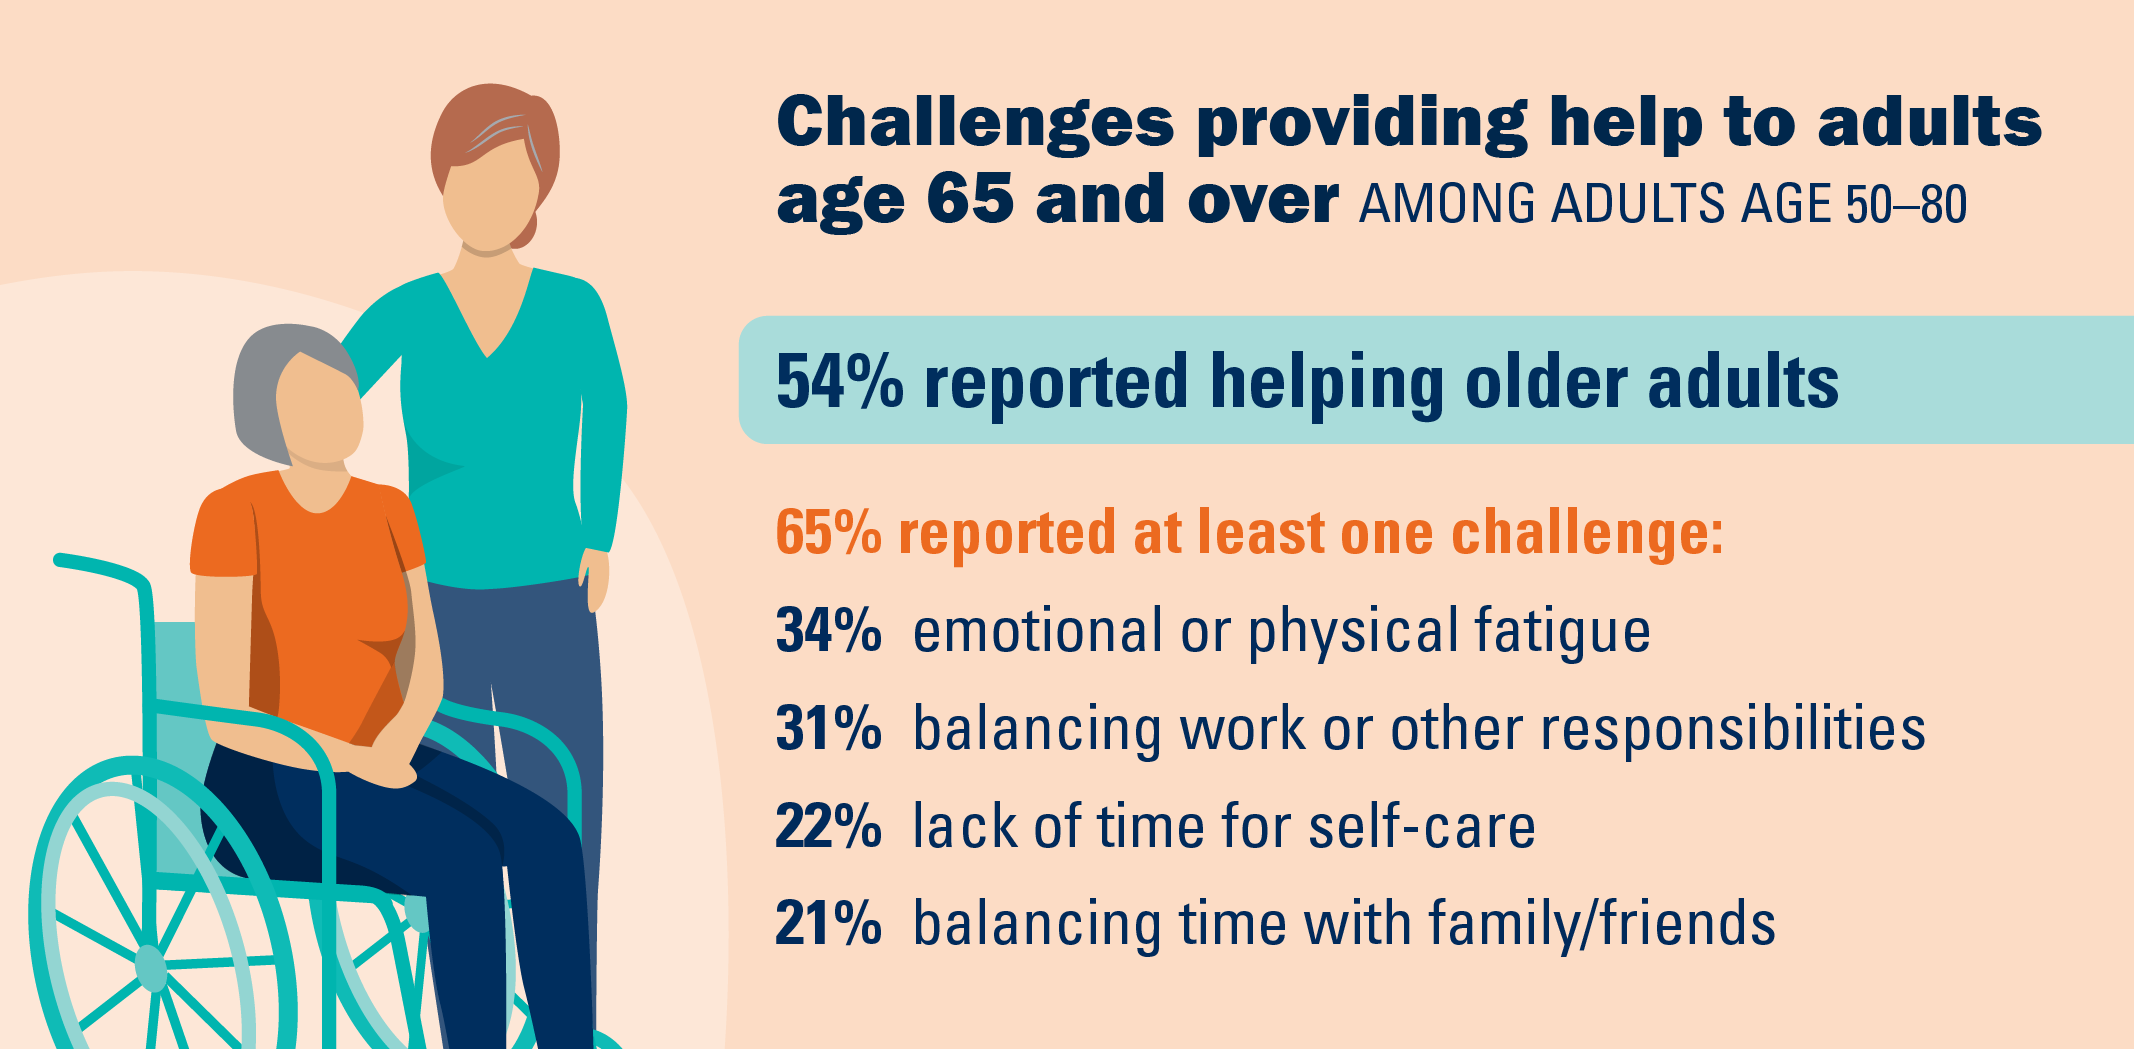 Challenges of providing help to adults 65 and over